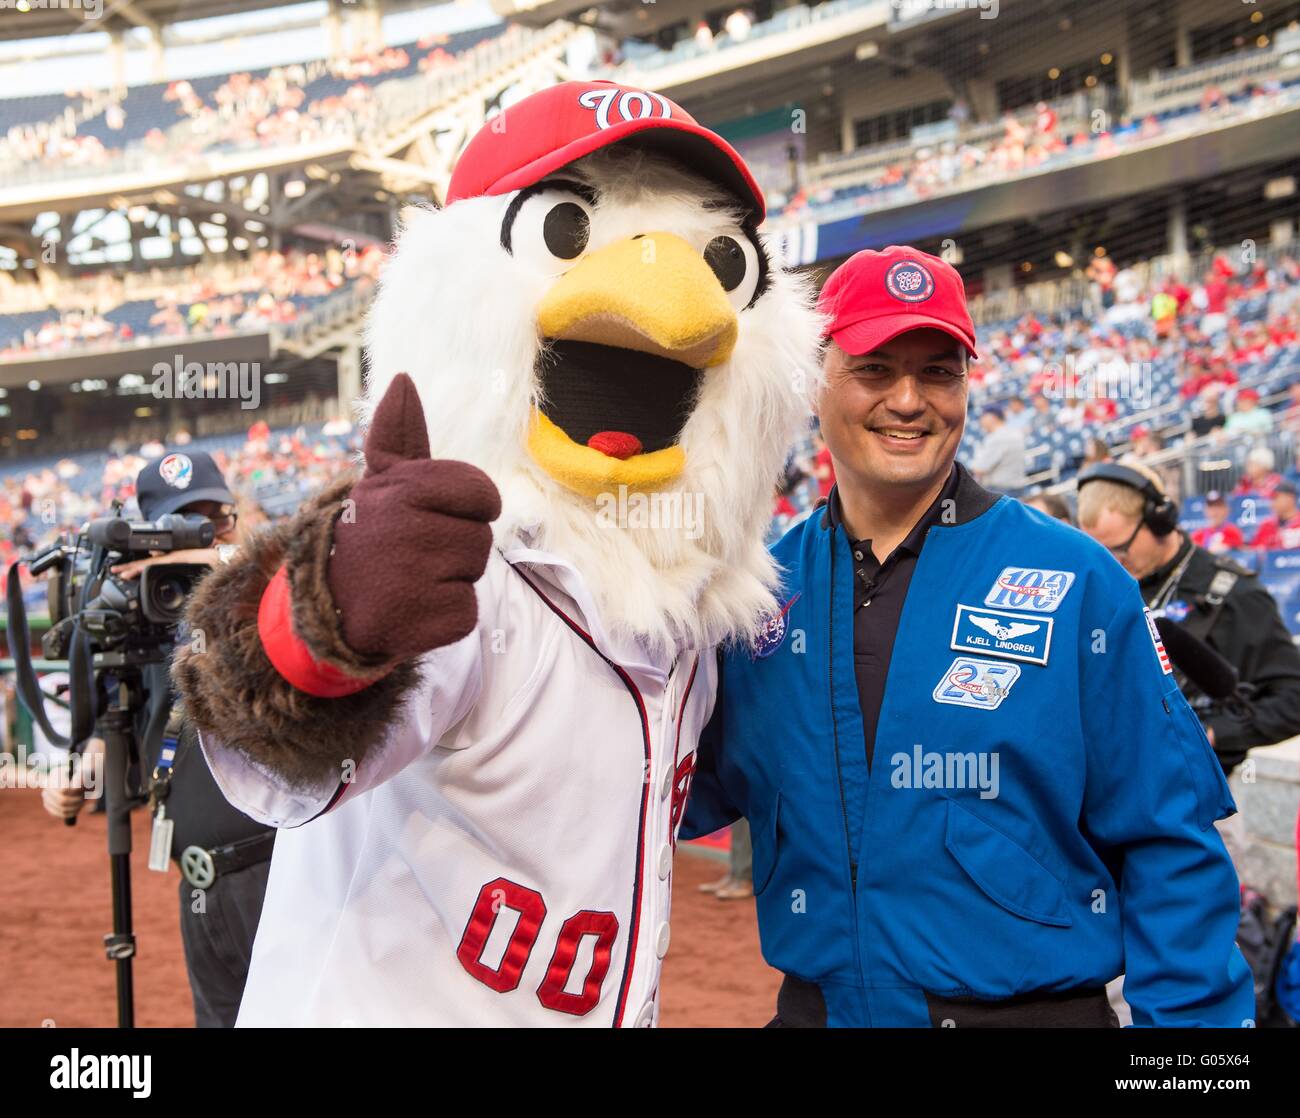 NASA astronaut Kjell Lindgren poses for a photo with the Washington Nationals mascot prior to throwing the ceremonial first pitch before the Washington Nationals take on the Philadelphia Phillies at Nationals Park April 26, 2016 in Washington, DC. Lindgren spent 141 days aboard the International Space Station as part of Expeditions 44 and 45. Stock Photo